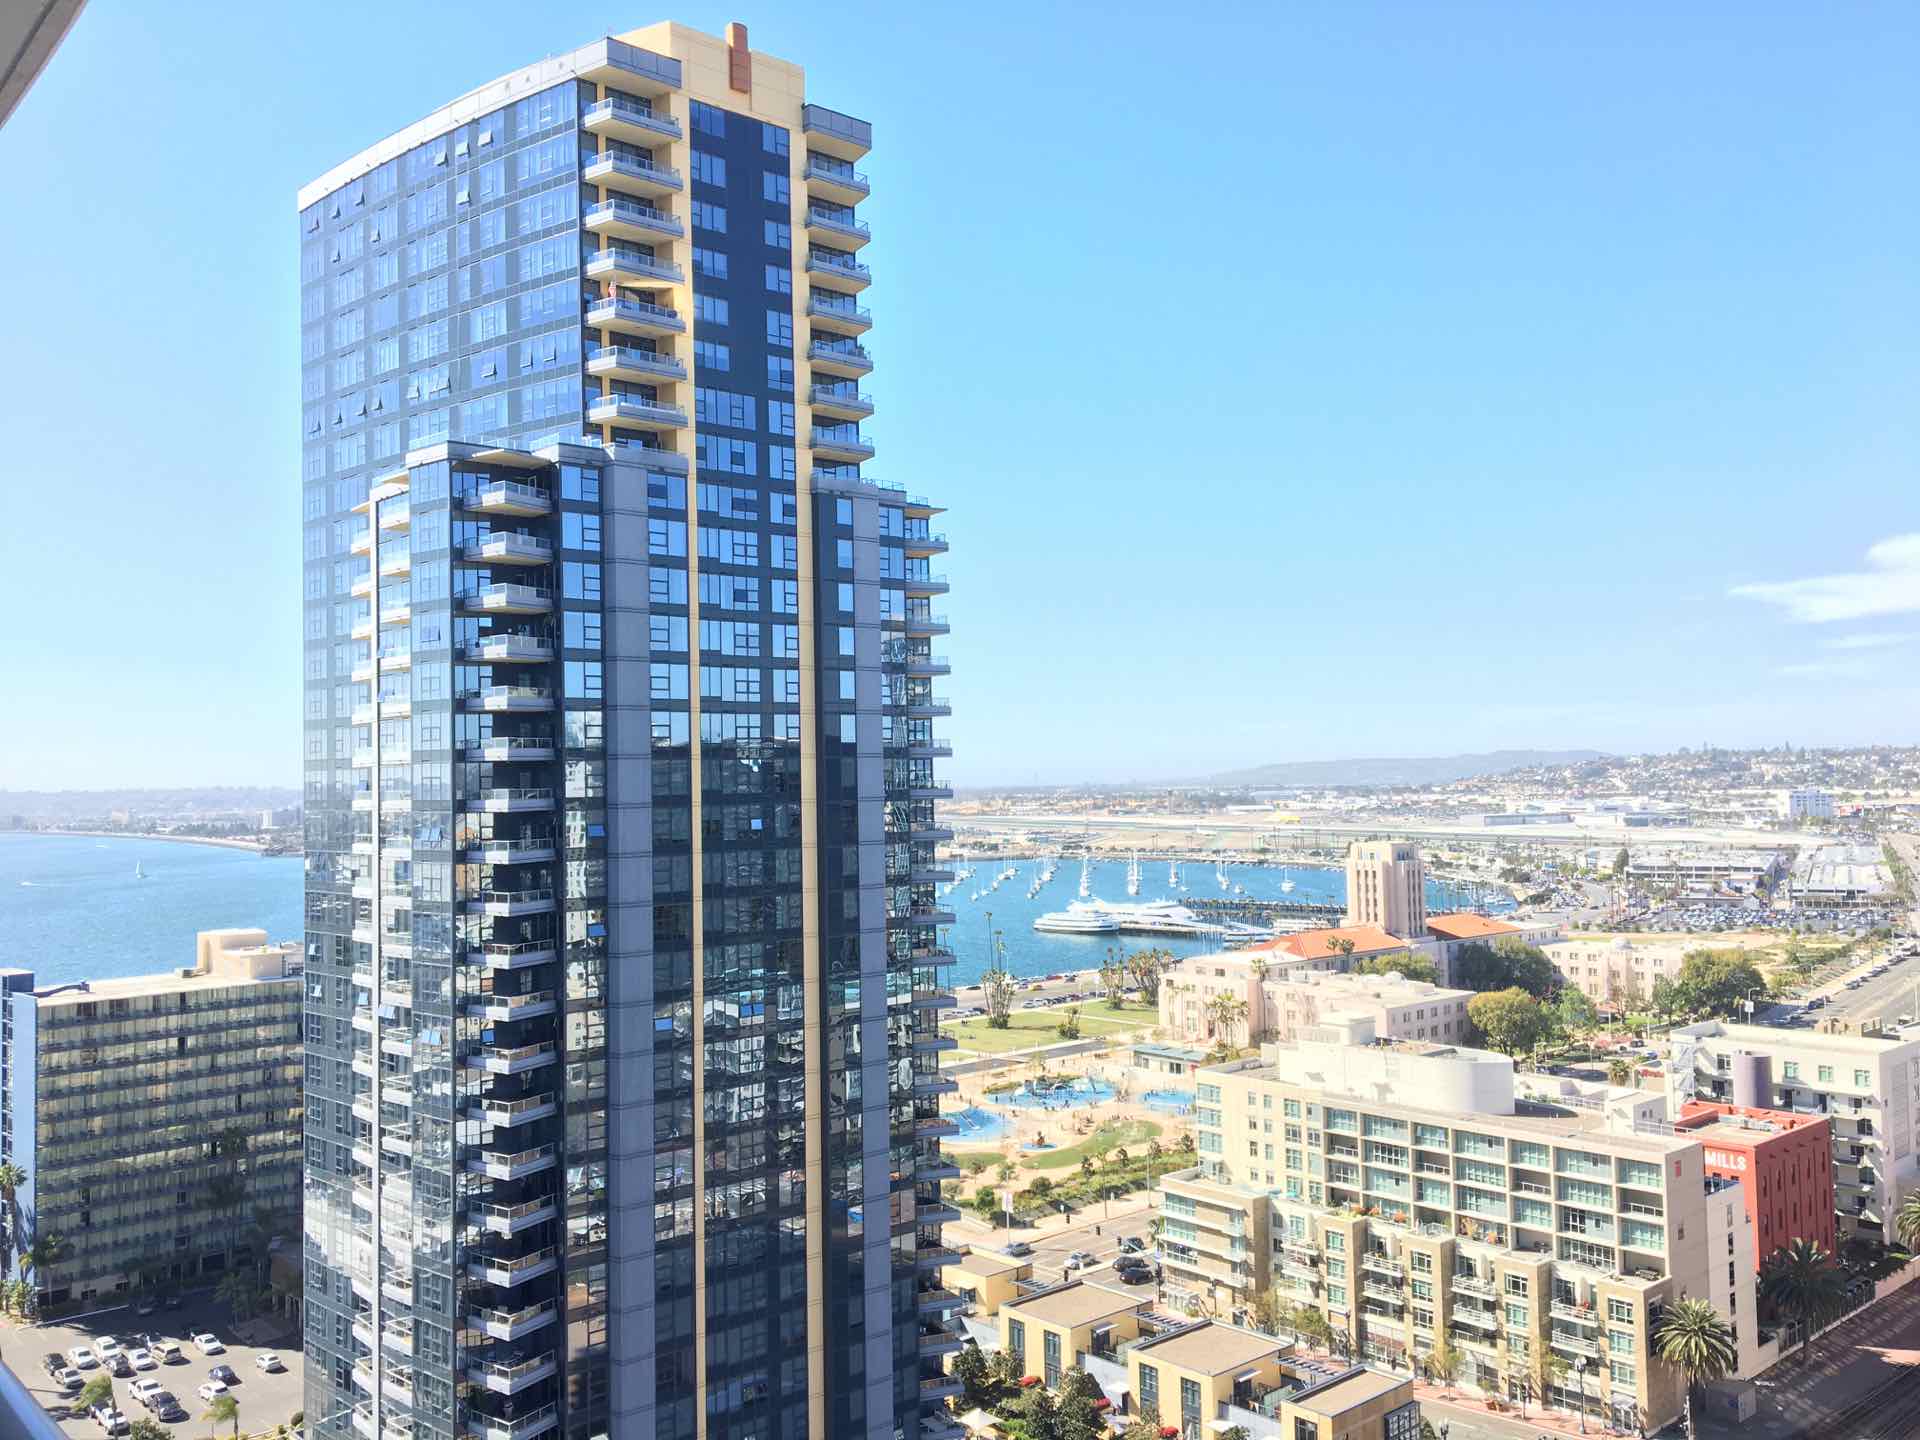 Bayside tower located at 1325 Pacific Hwy San Diego